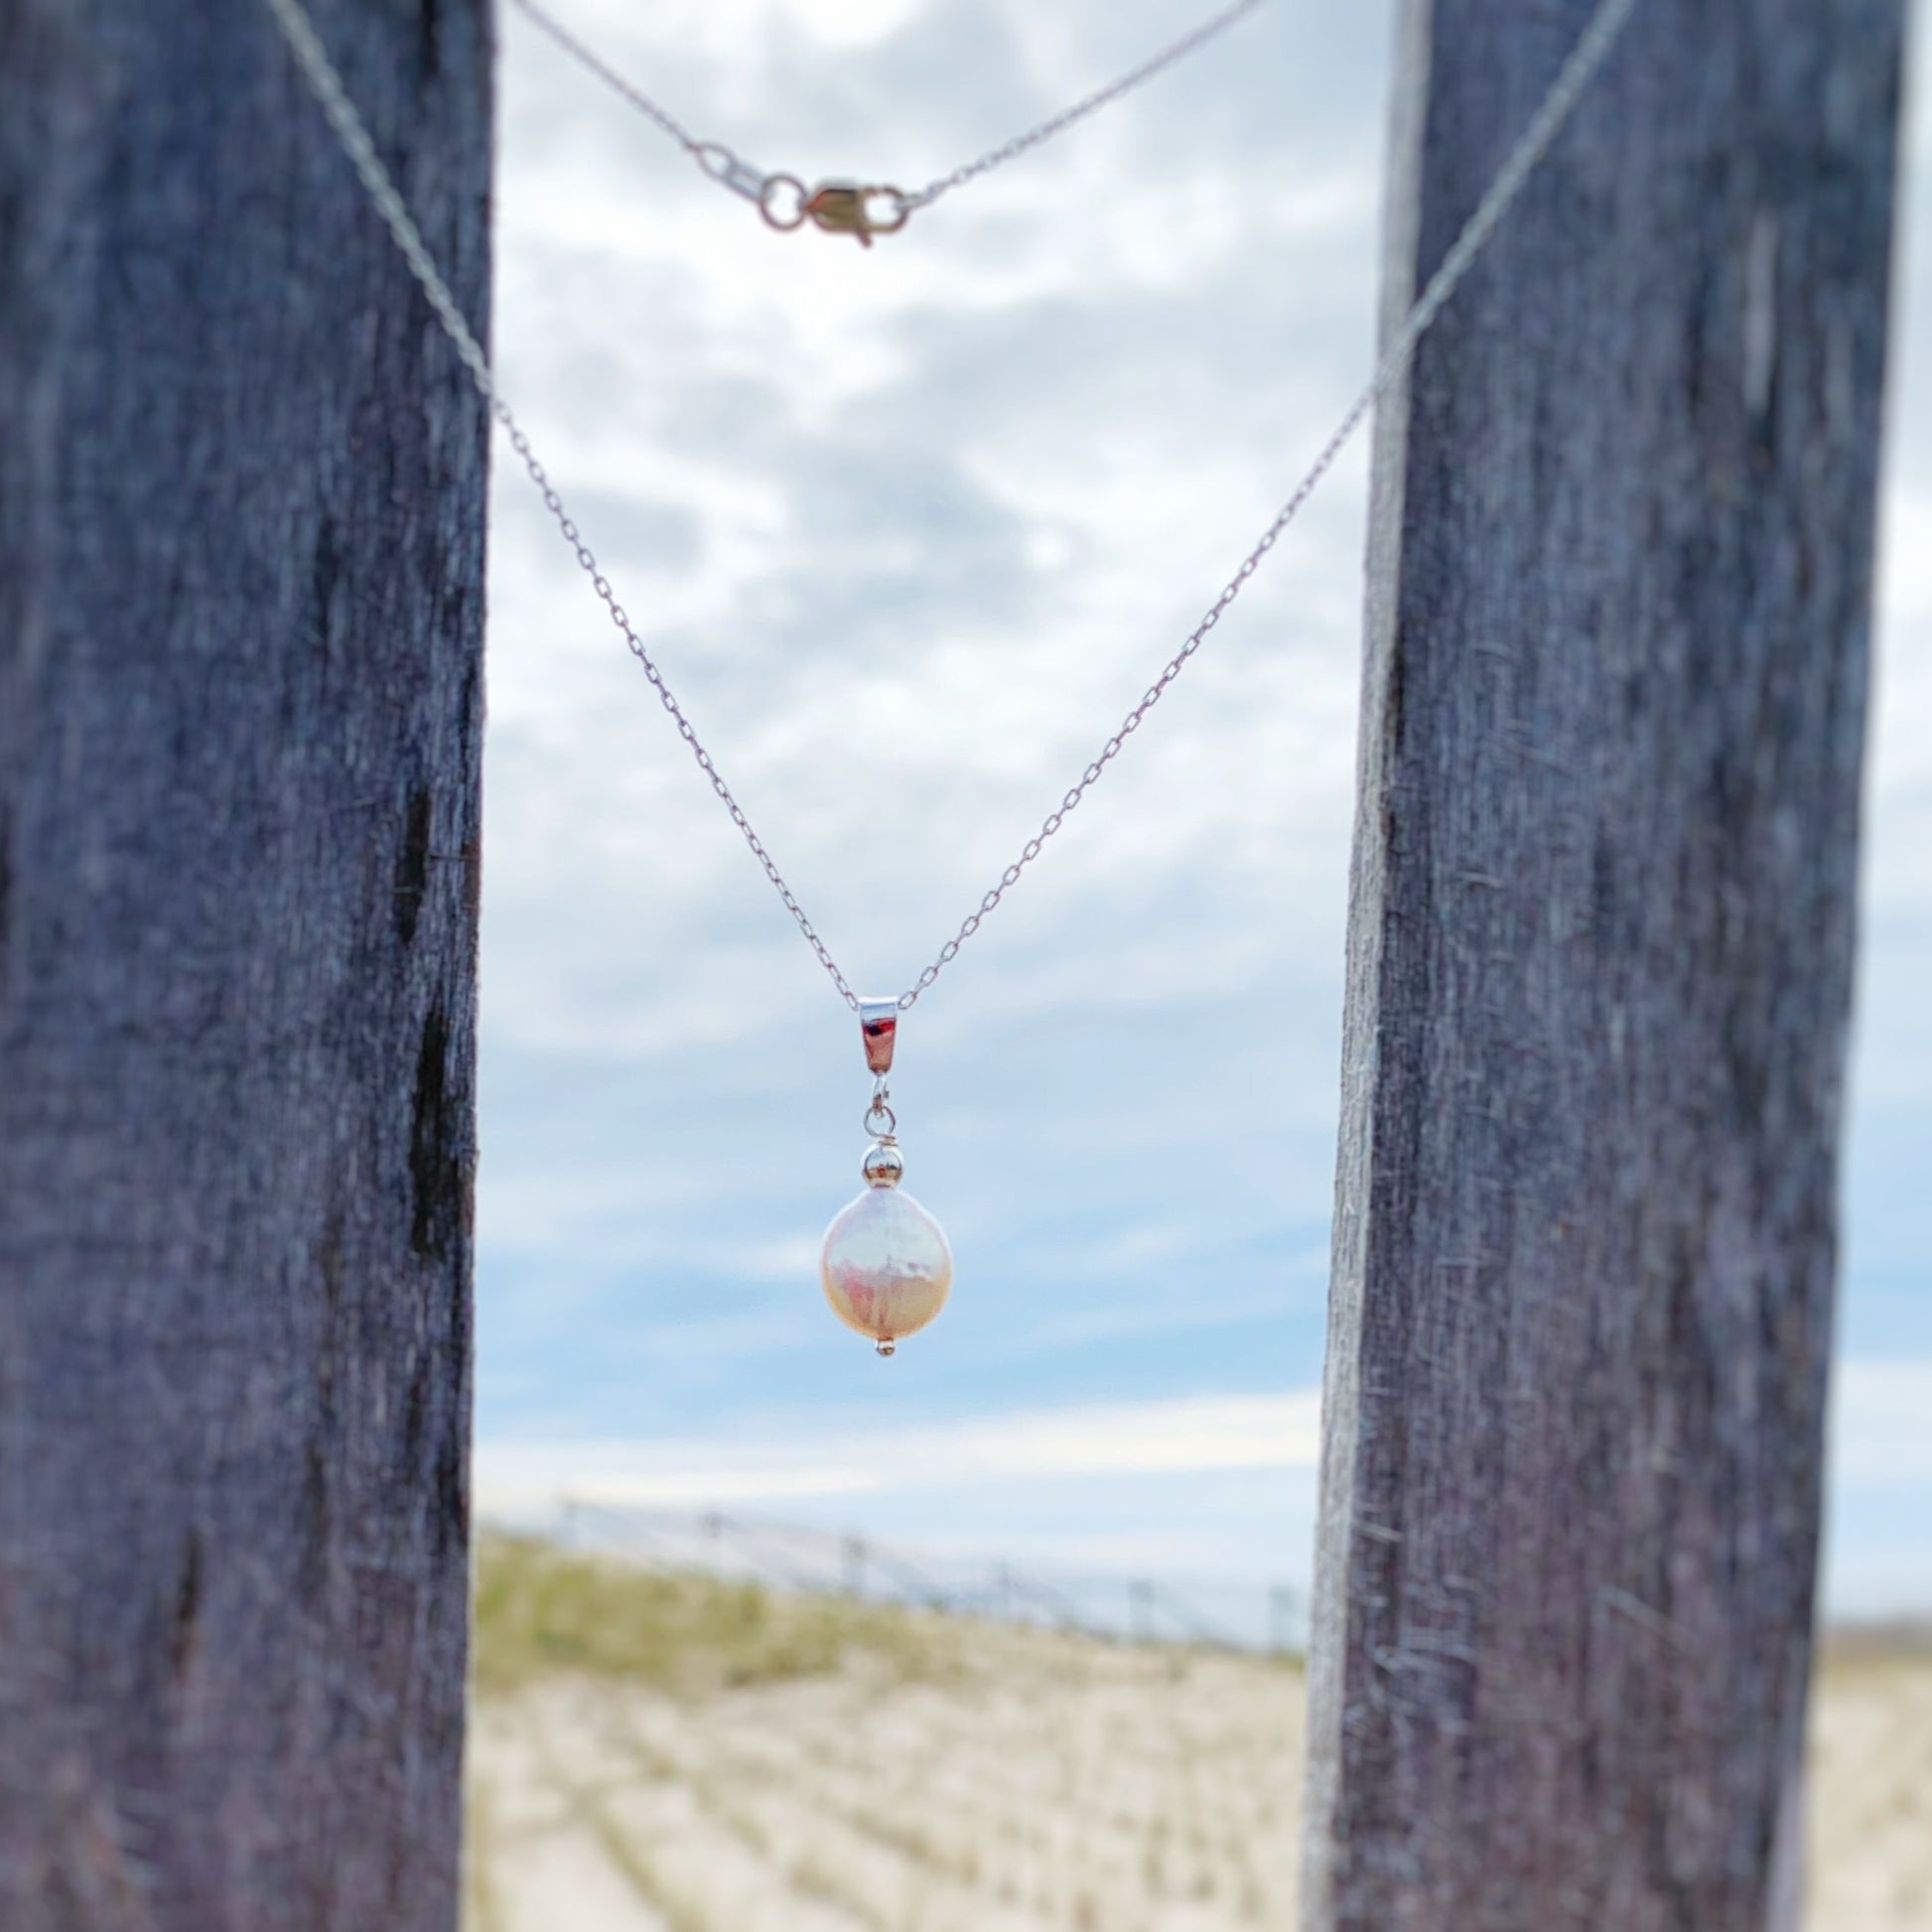  the Newport pendant necklace from the mermaids and madeleines tide pool collection.The necklace is created with a freshwater white iridescent coin pearl suspended from a sterling silver bail and chain. It's photographed here hanging on a beach fence with blurred fence posts and beach in the background